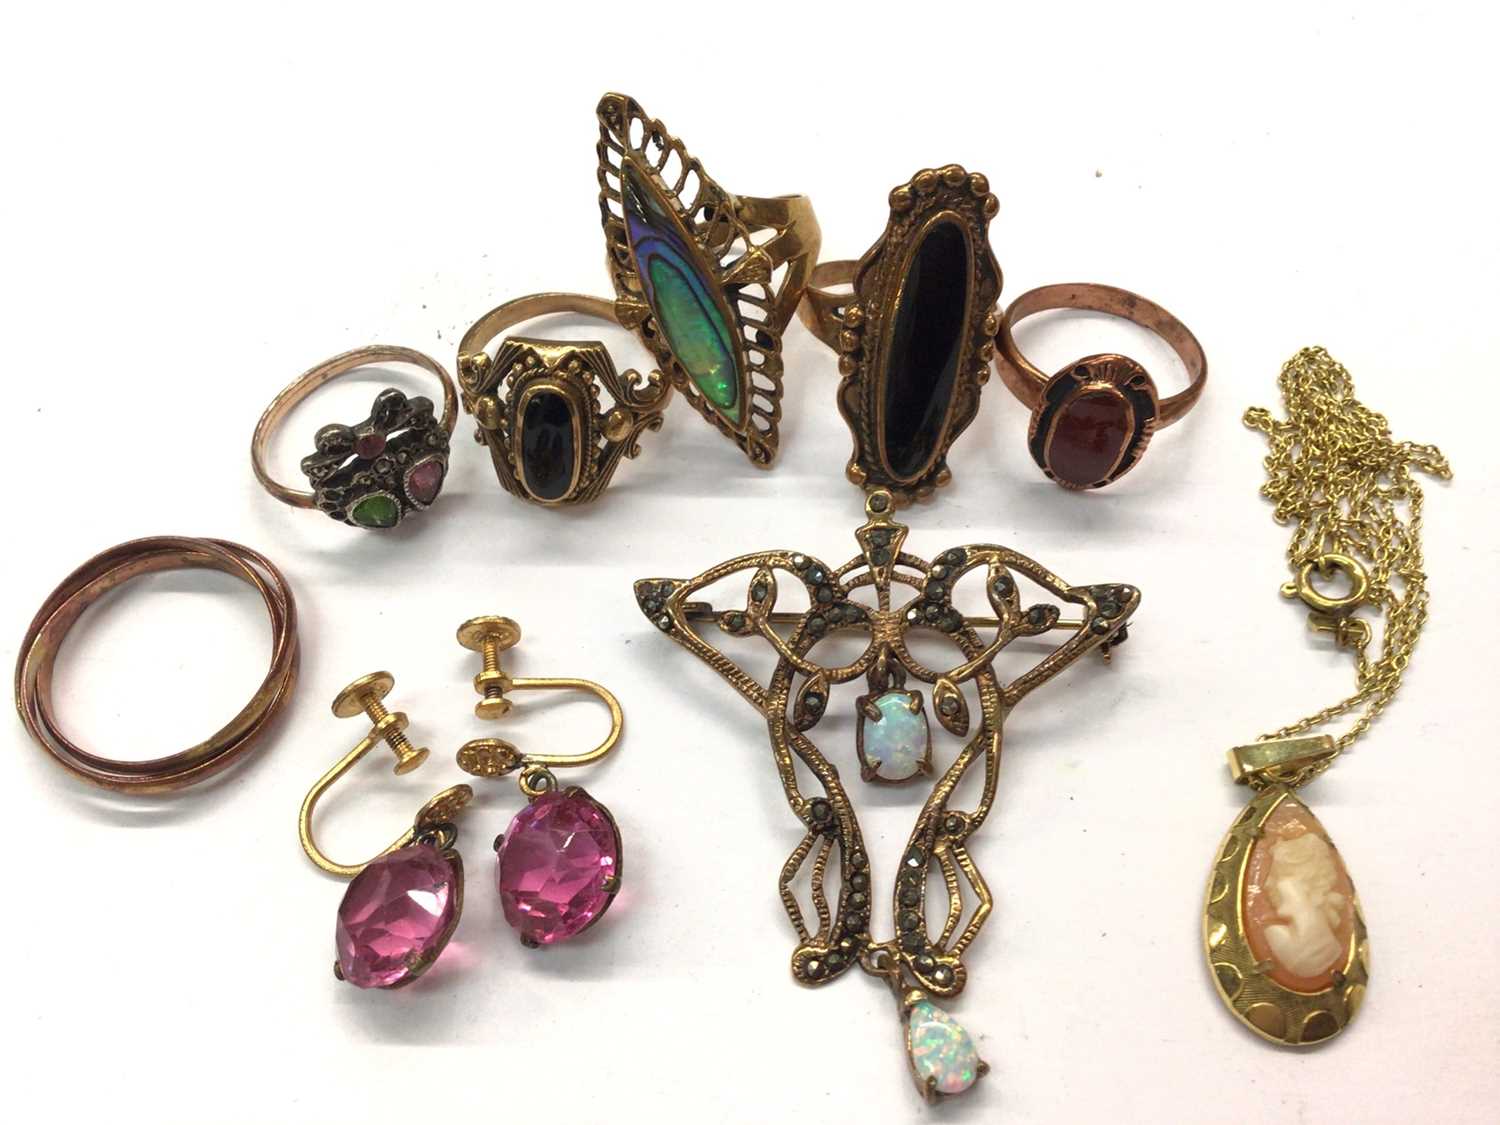 Lot 10 - Group brass dress rings, pair pink stone screw back earrings, Art Nouveau style brooch and cameo necklace